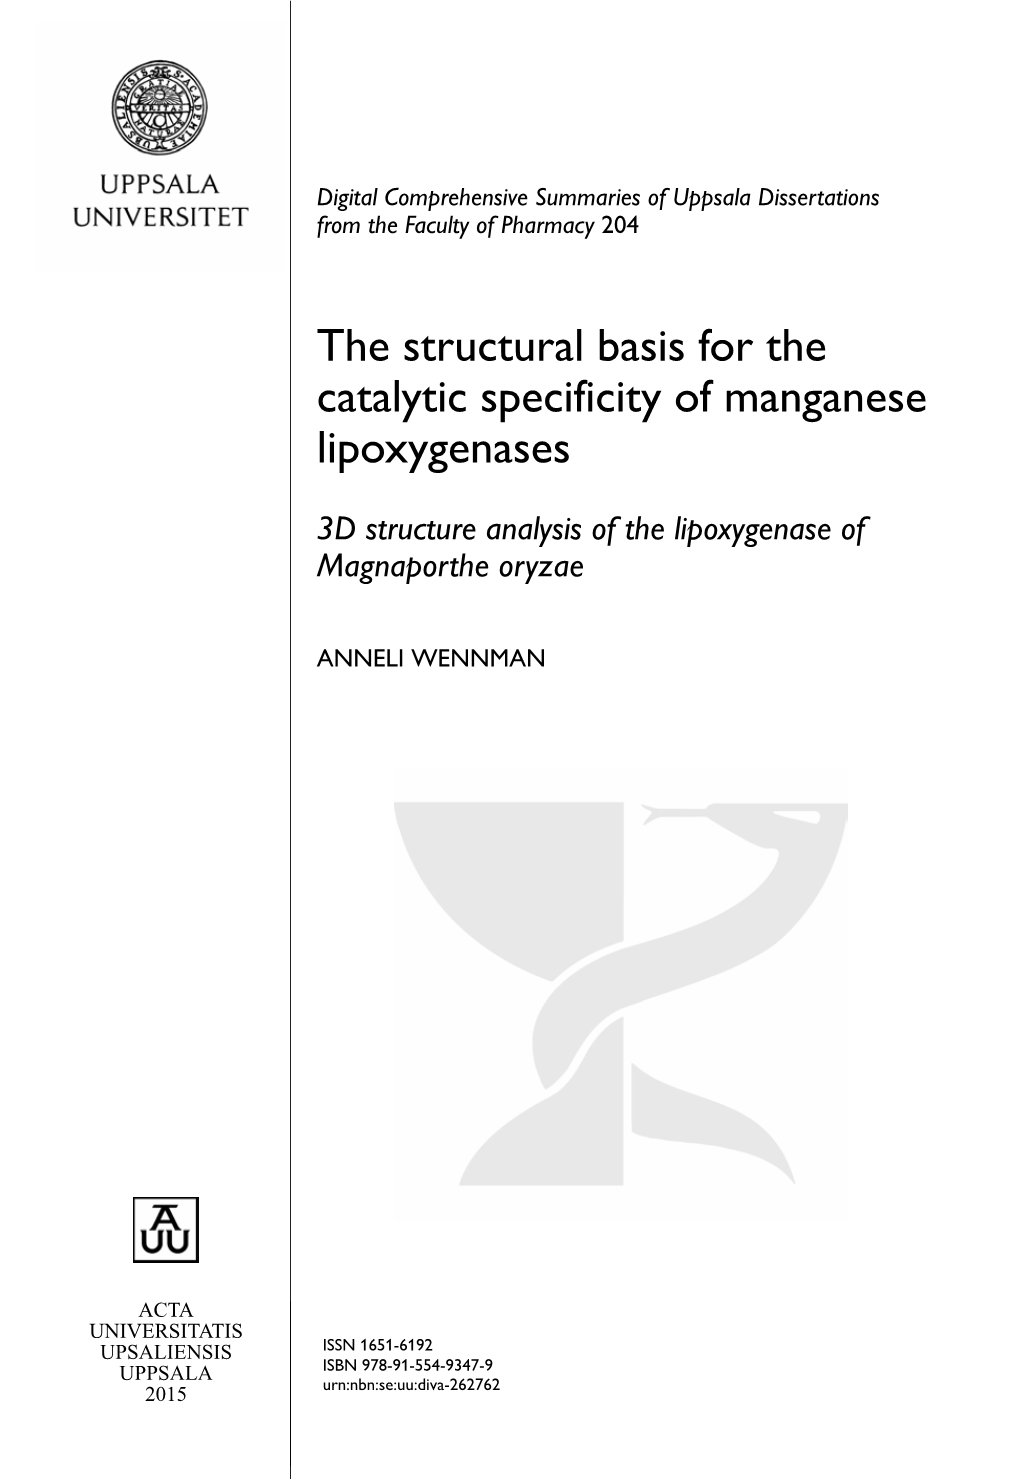 The Structural Basis for the Catalytic Specificity of Manganese Lipoxygenases